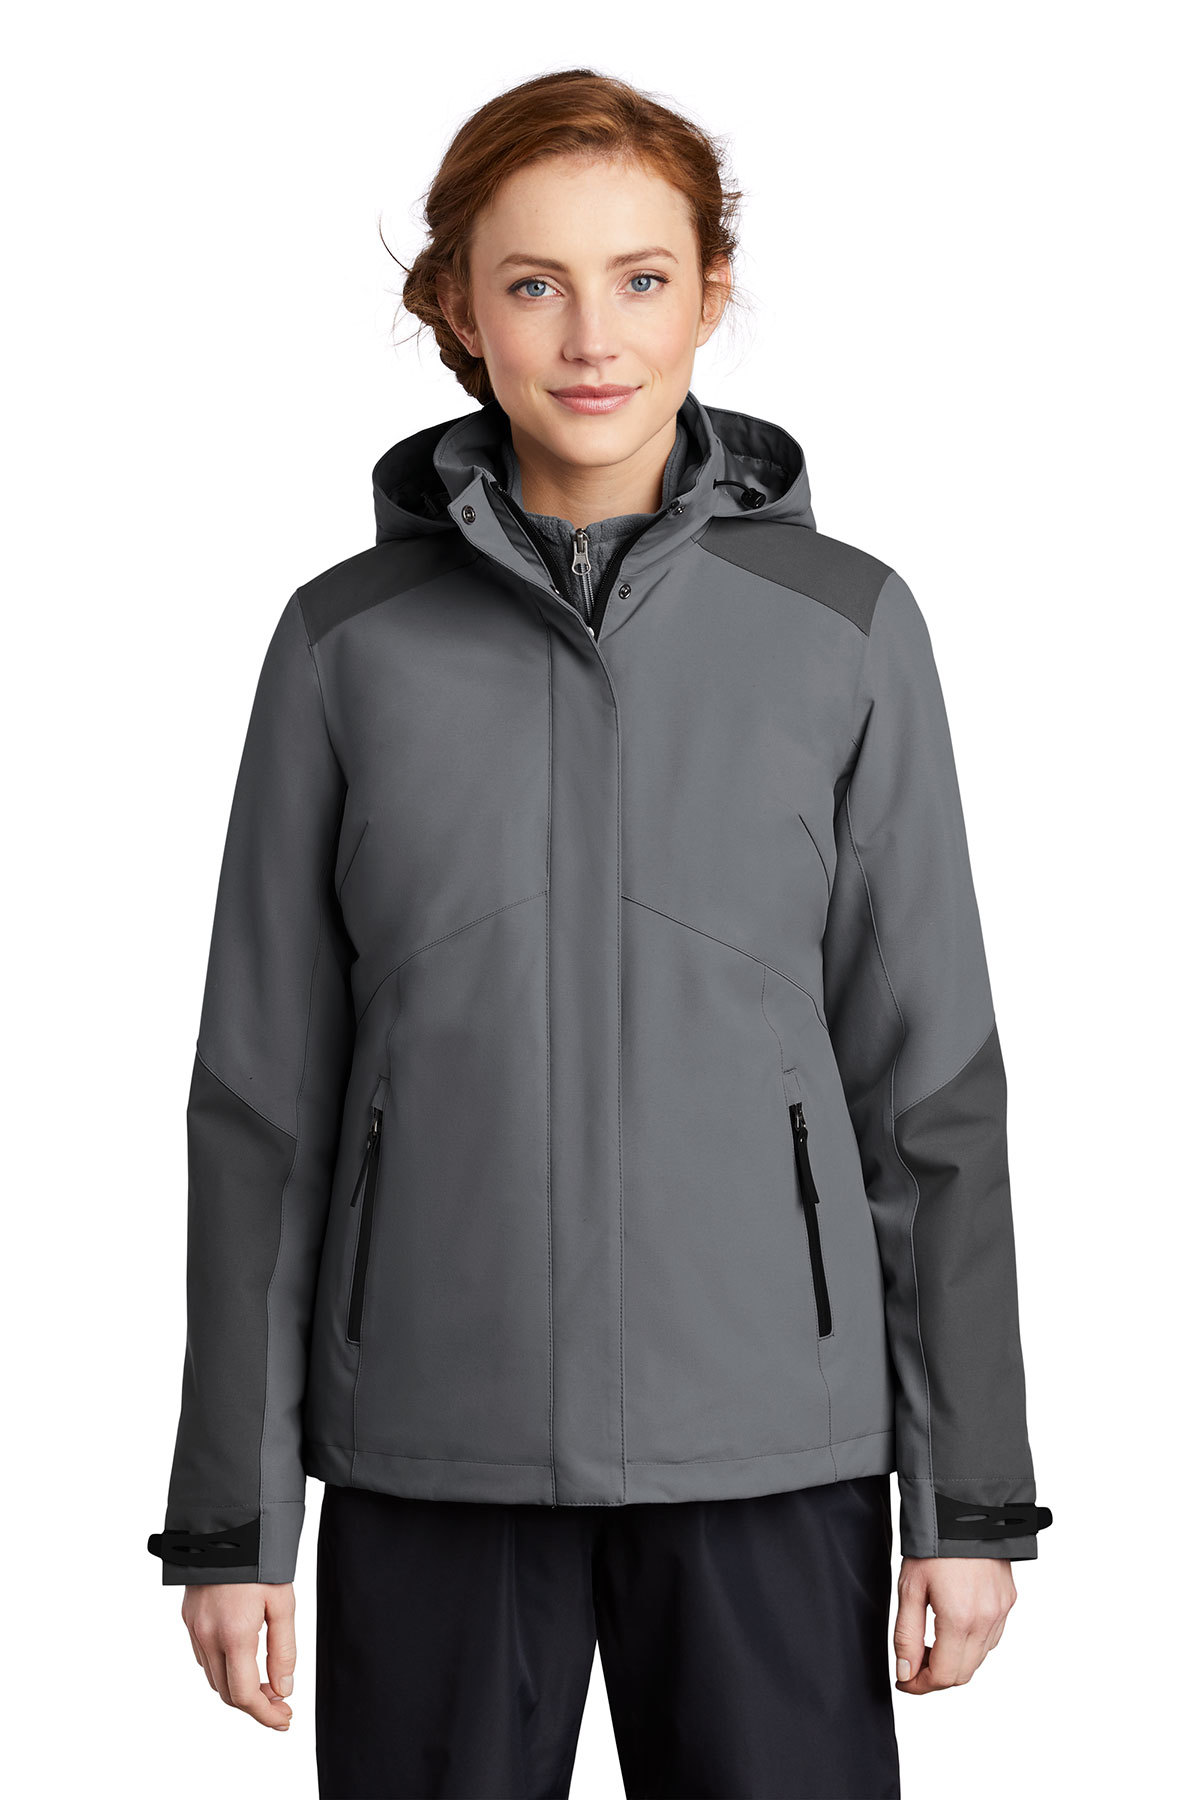 Port Authority L405 - Ladies Insulated Waterproof Tech Jacket